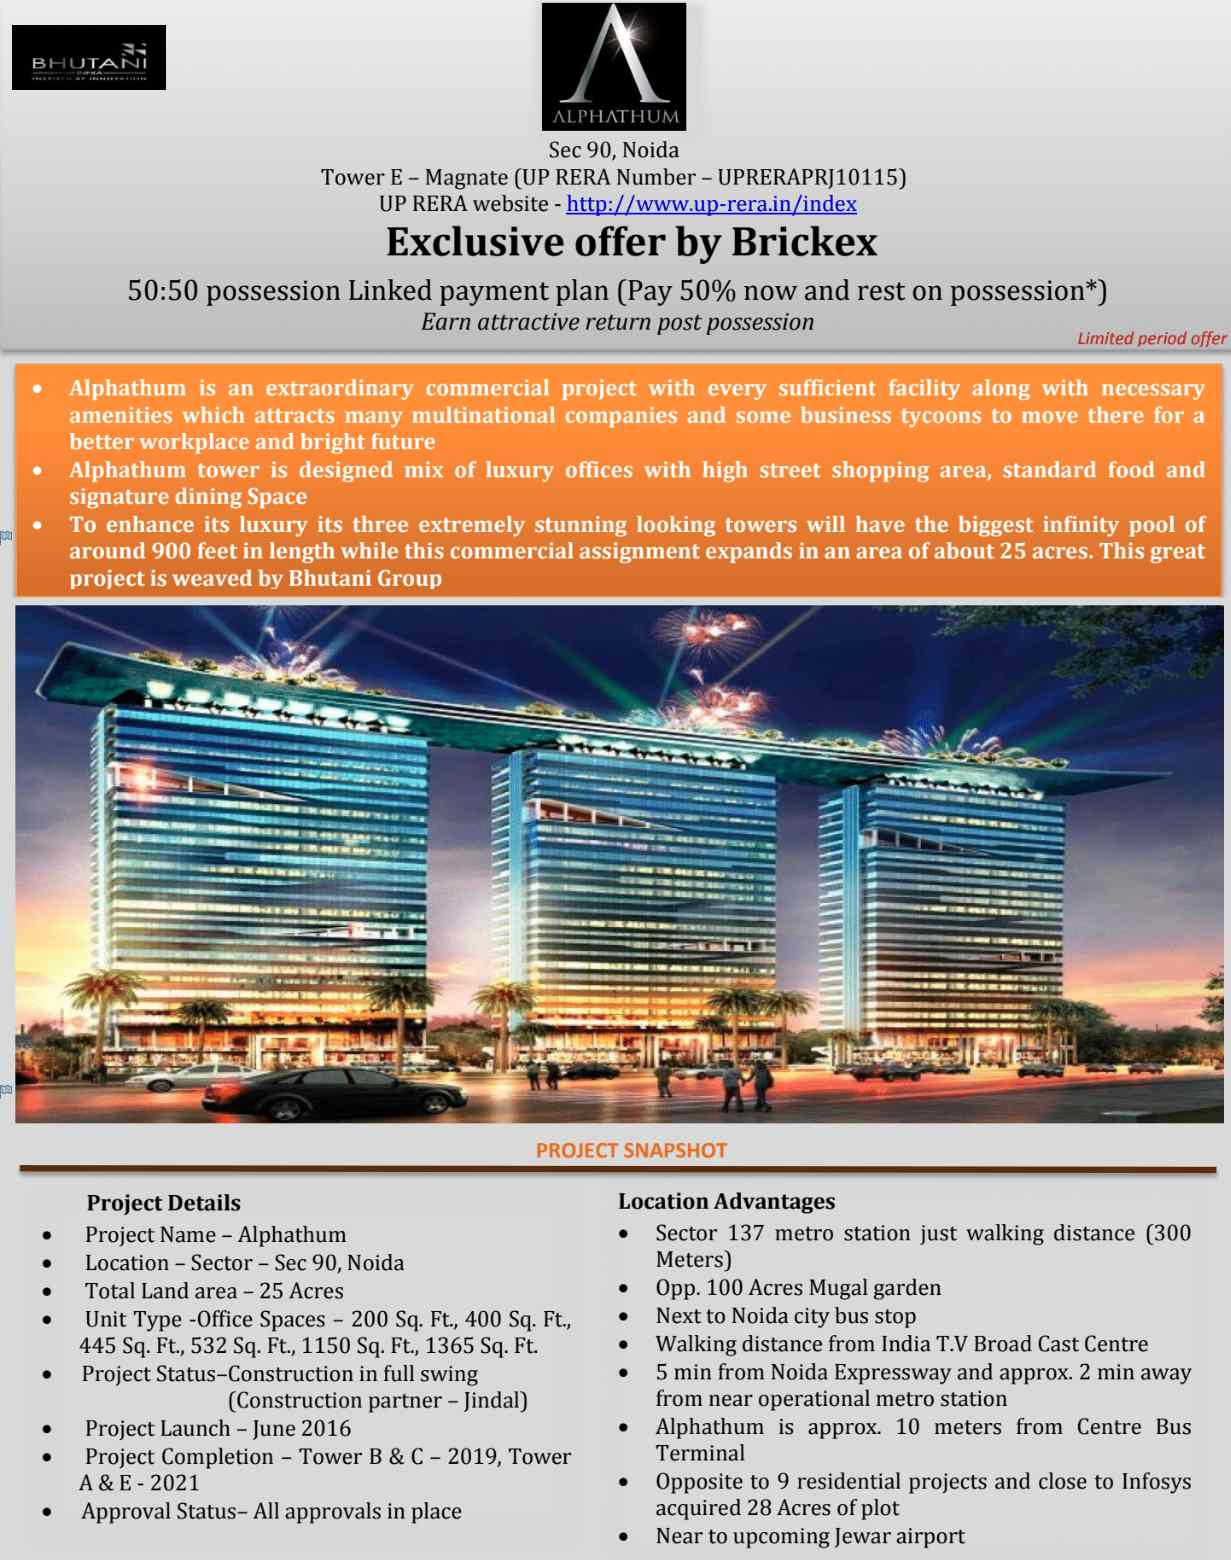 Avail 50:50 possession linked payment plan at Bhutani Alphathum in Noida